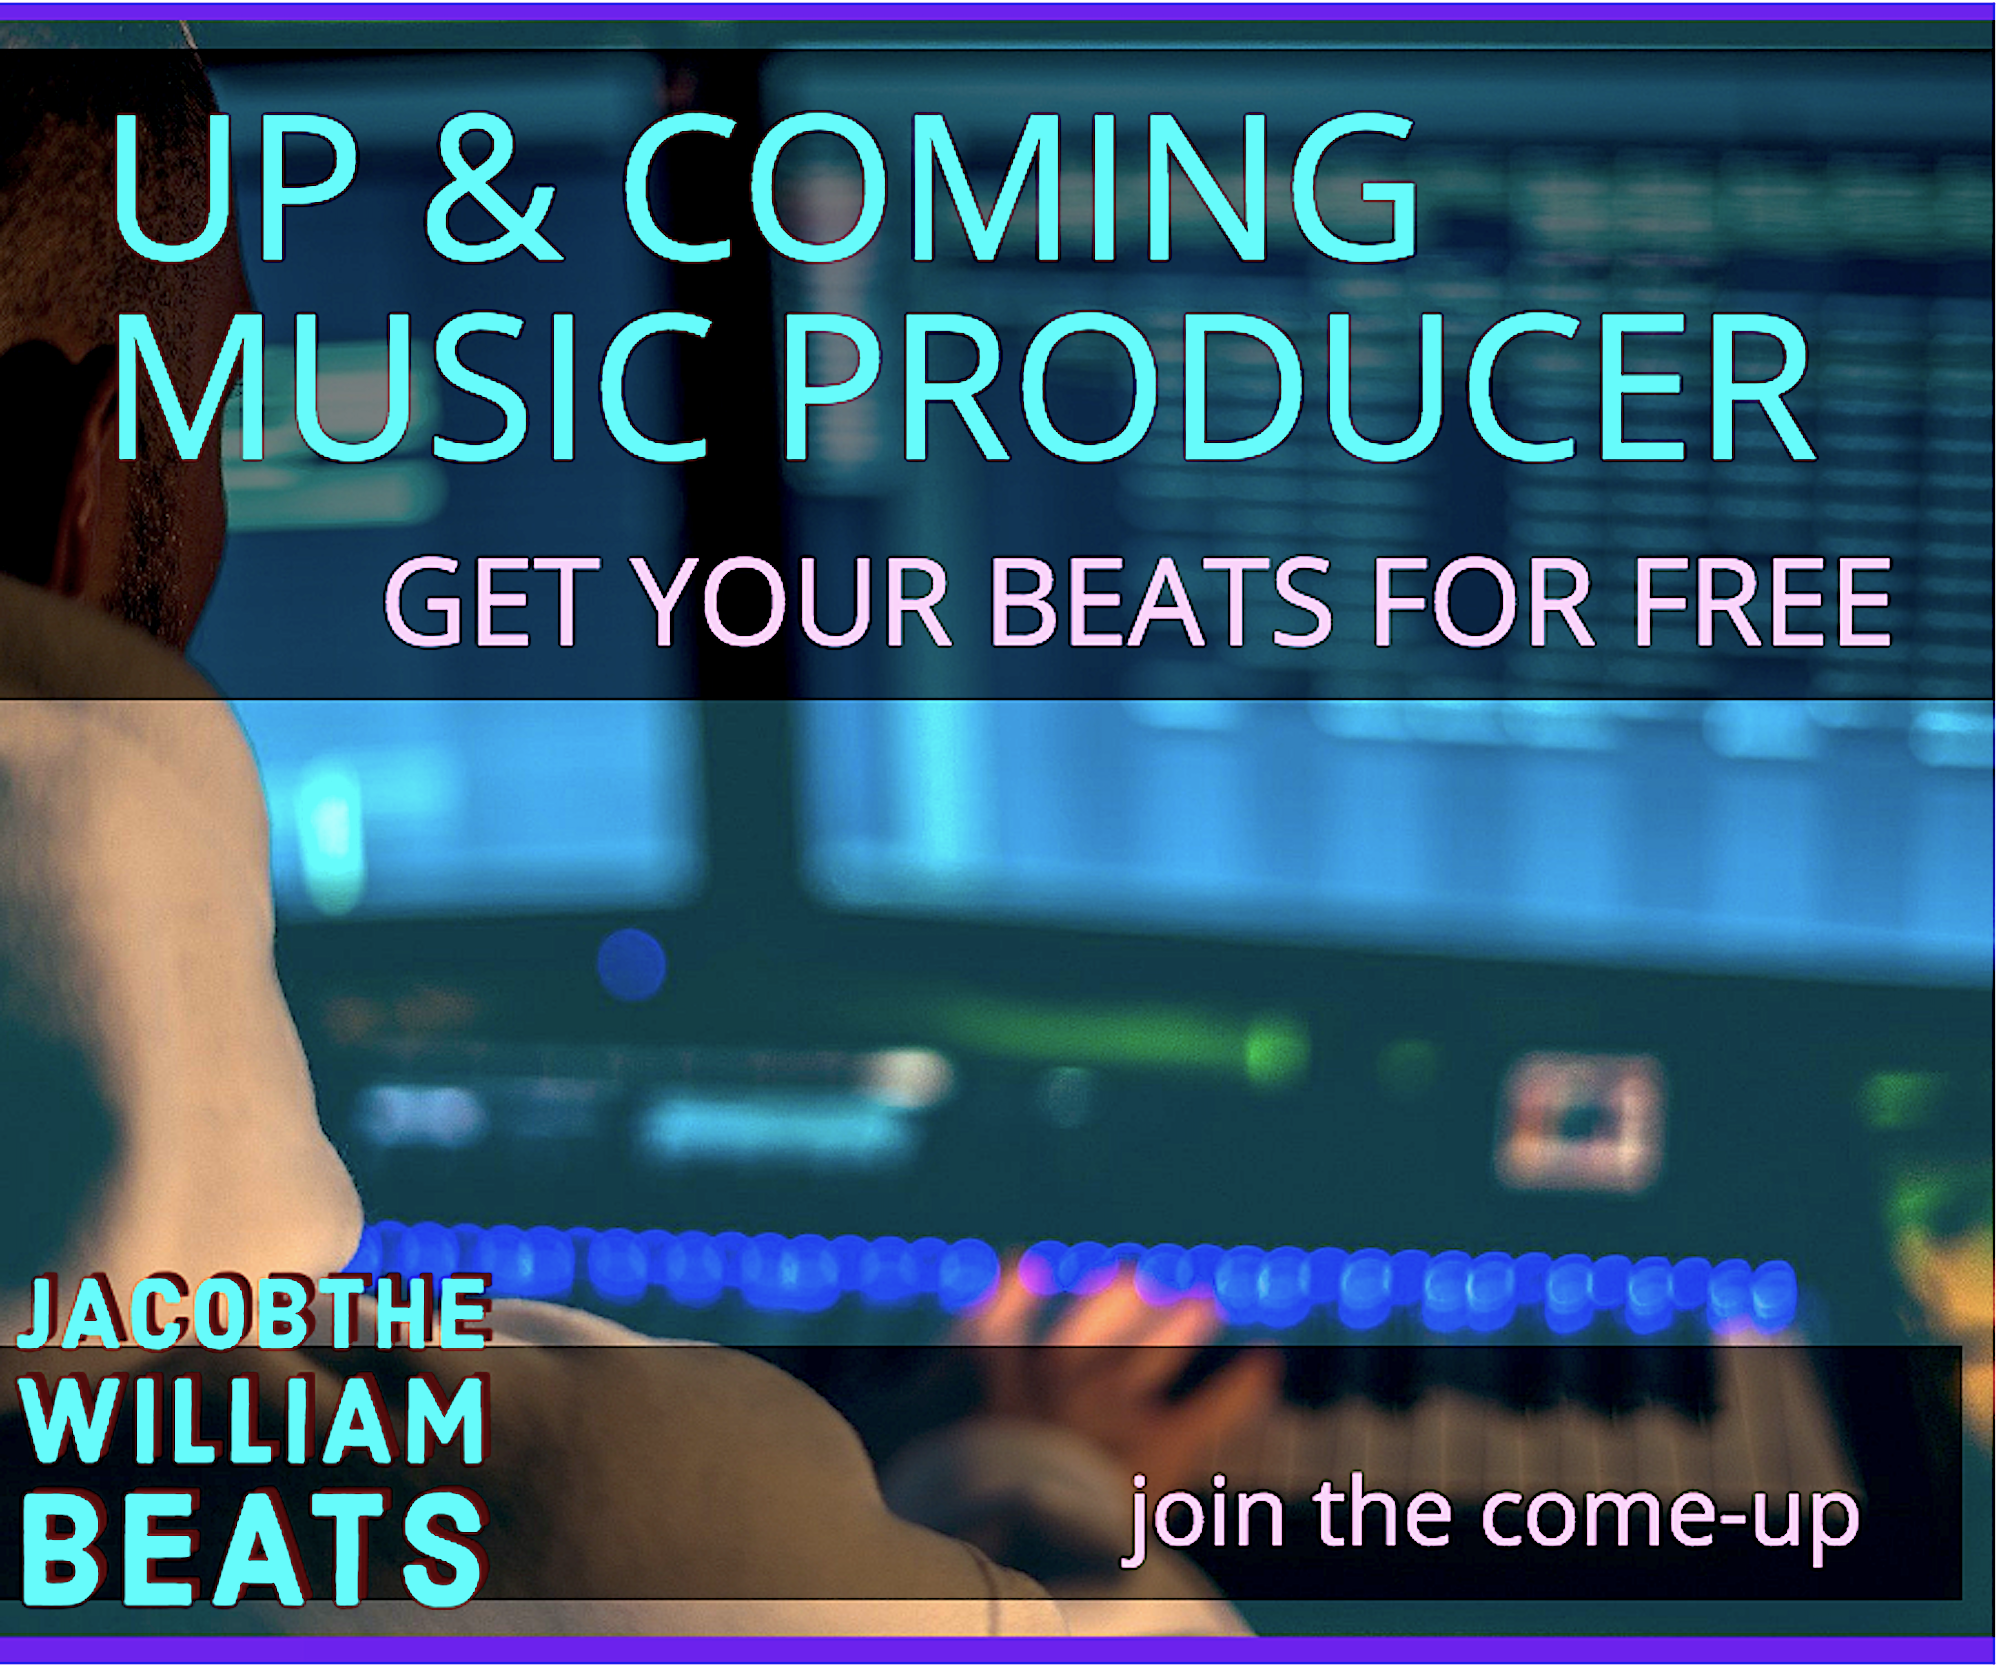 jacobthewilliam.BEATS DIFFERENT:  up & coming music producer. Get your beats for free